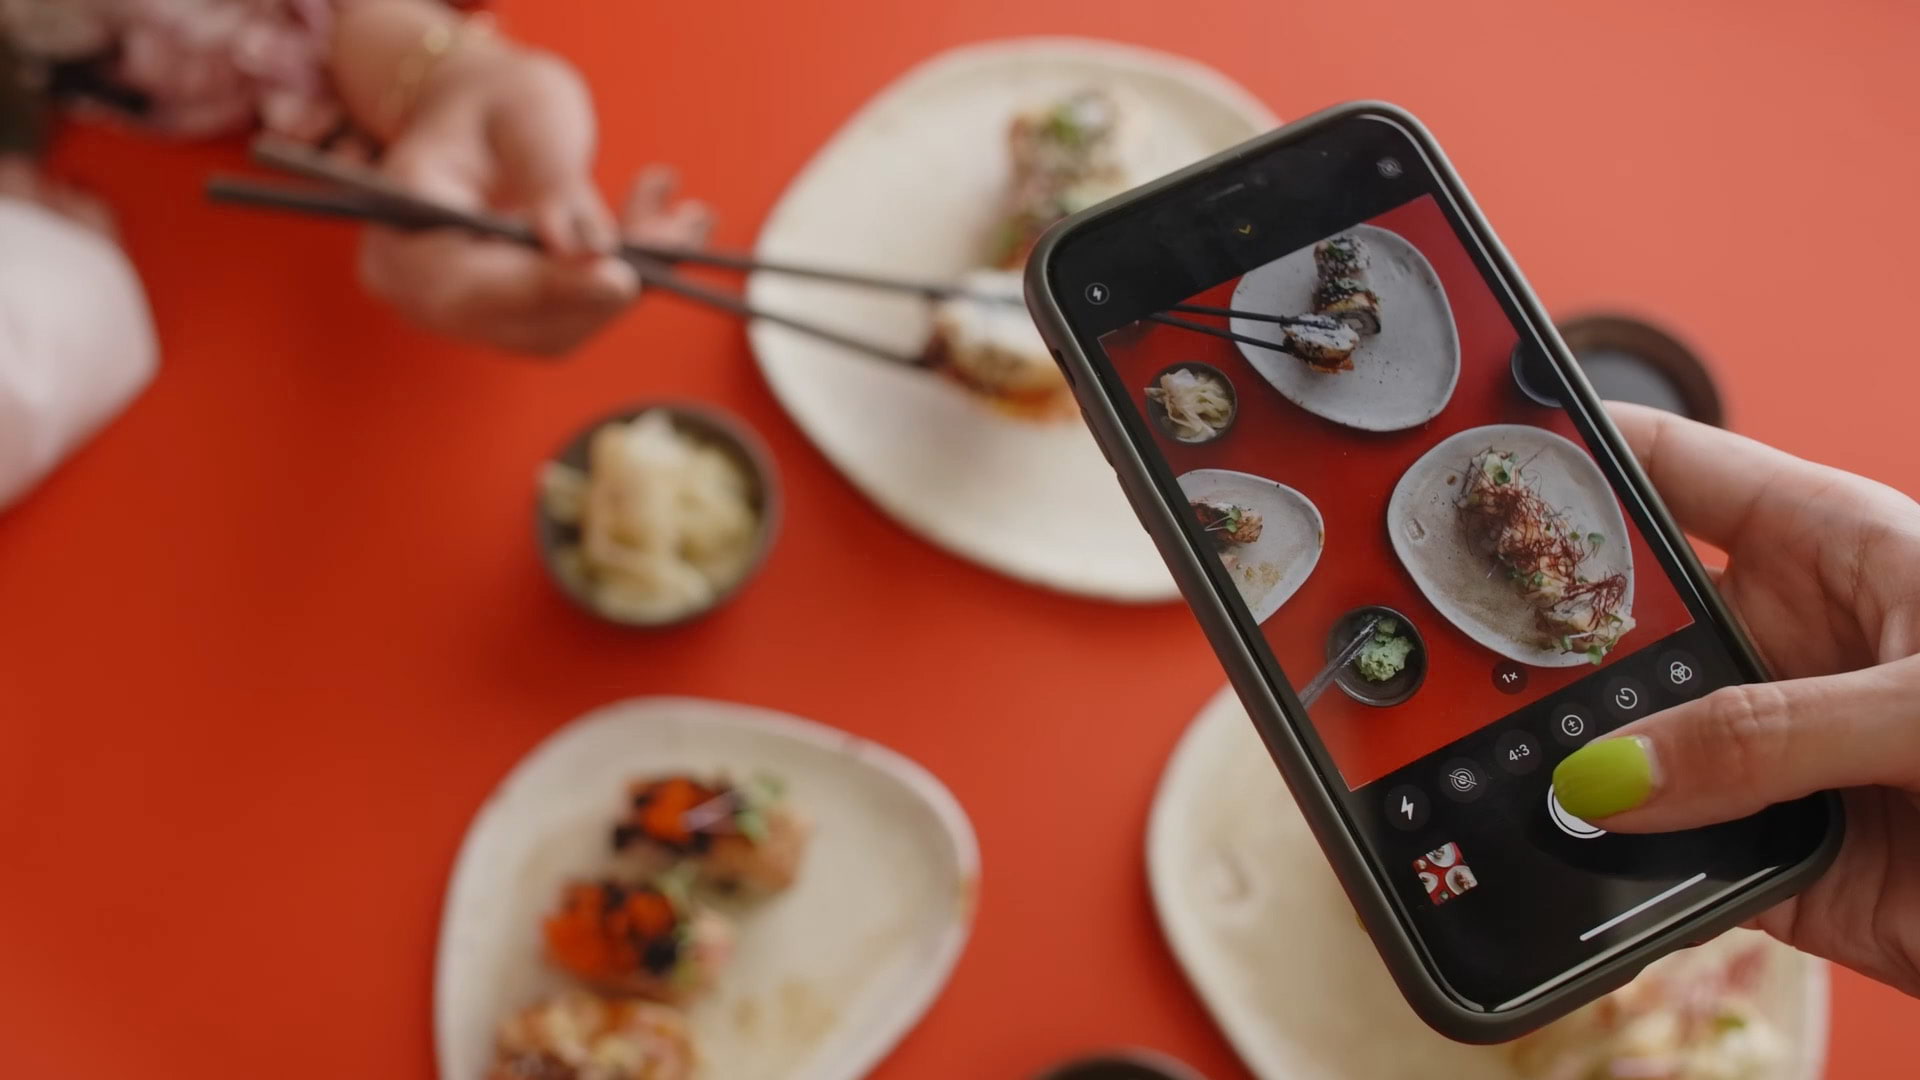 A person holds a cell phone over a table full of food to take a picture. The image on the phone is in focus but the food itself is not.